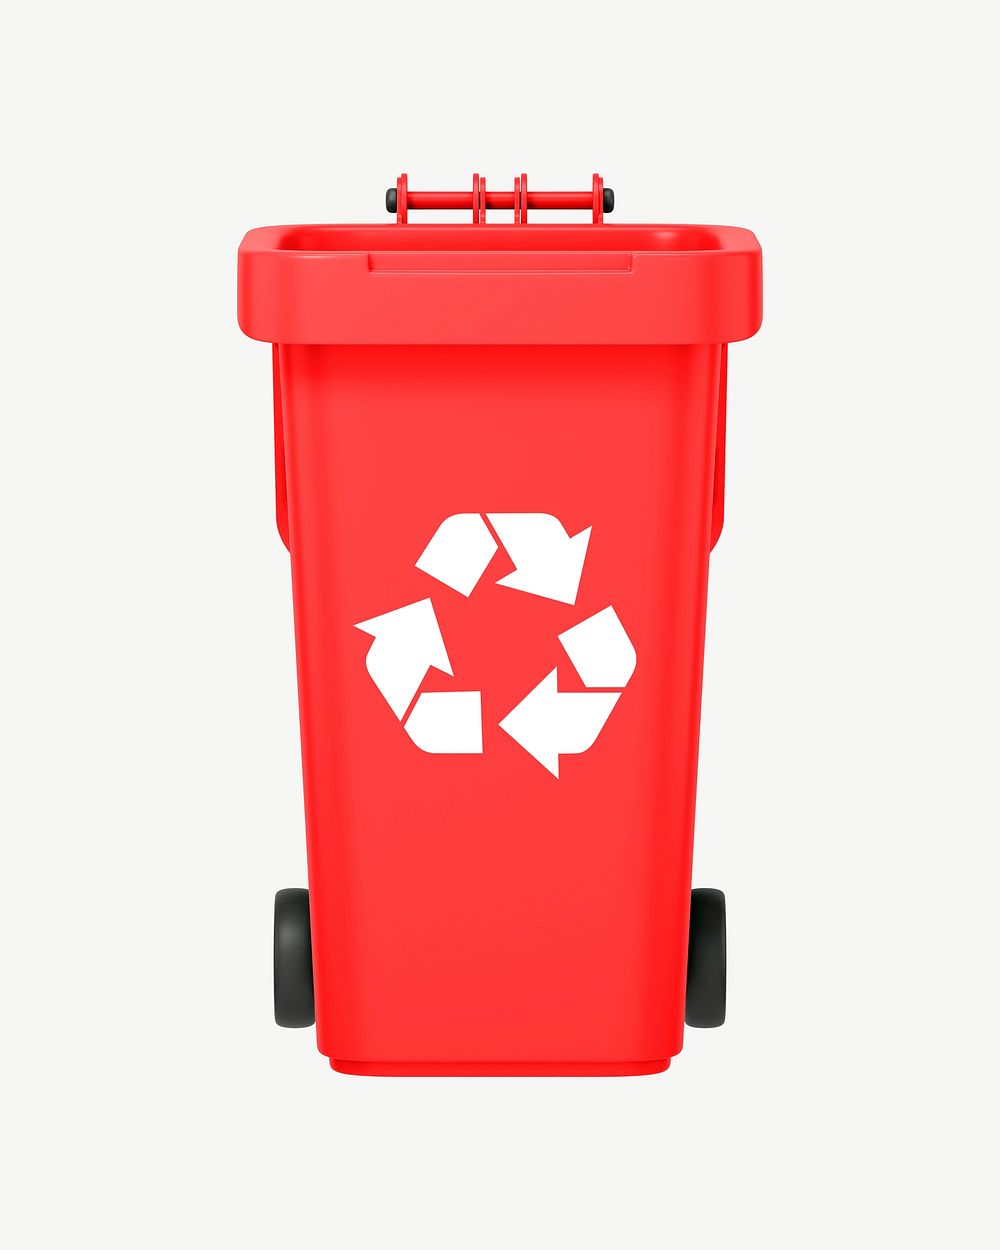 3D recycling bin, collage element psd